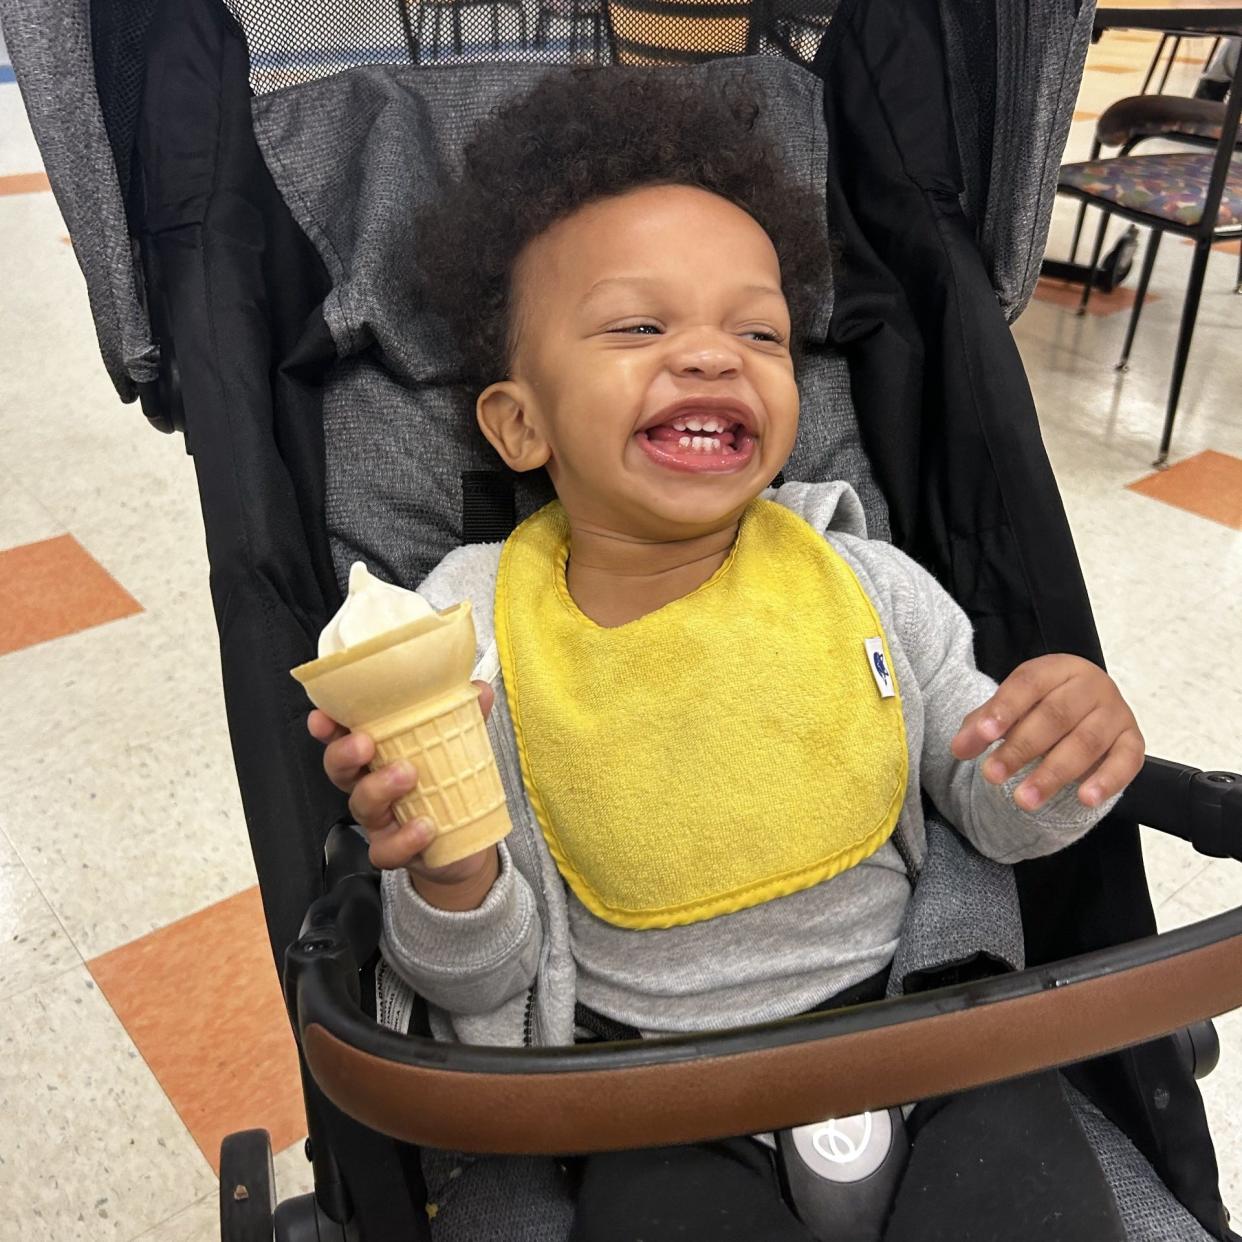 Makaela King's son Dakari is tickled to death with the ice cream cone he got while with his mom at Virginia State University's Gateway Dining Hall. Makaela King is one of six students living with their children at the University Apartments at Ettrick. VSU opened the apartments in November as part of the $1.45 million grant it received from the U.S. Department of Education's Child Care Access Means Parents In School [CCAMPIS] program.